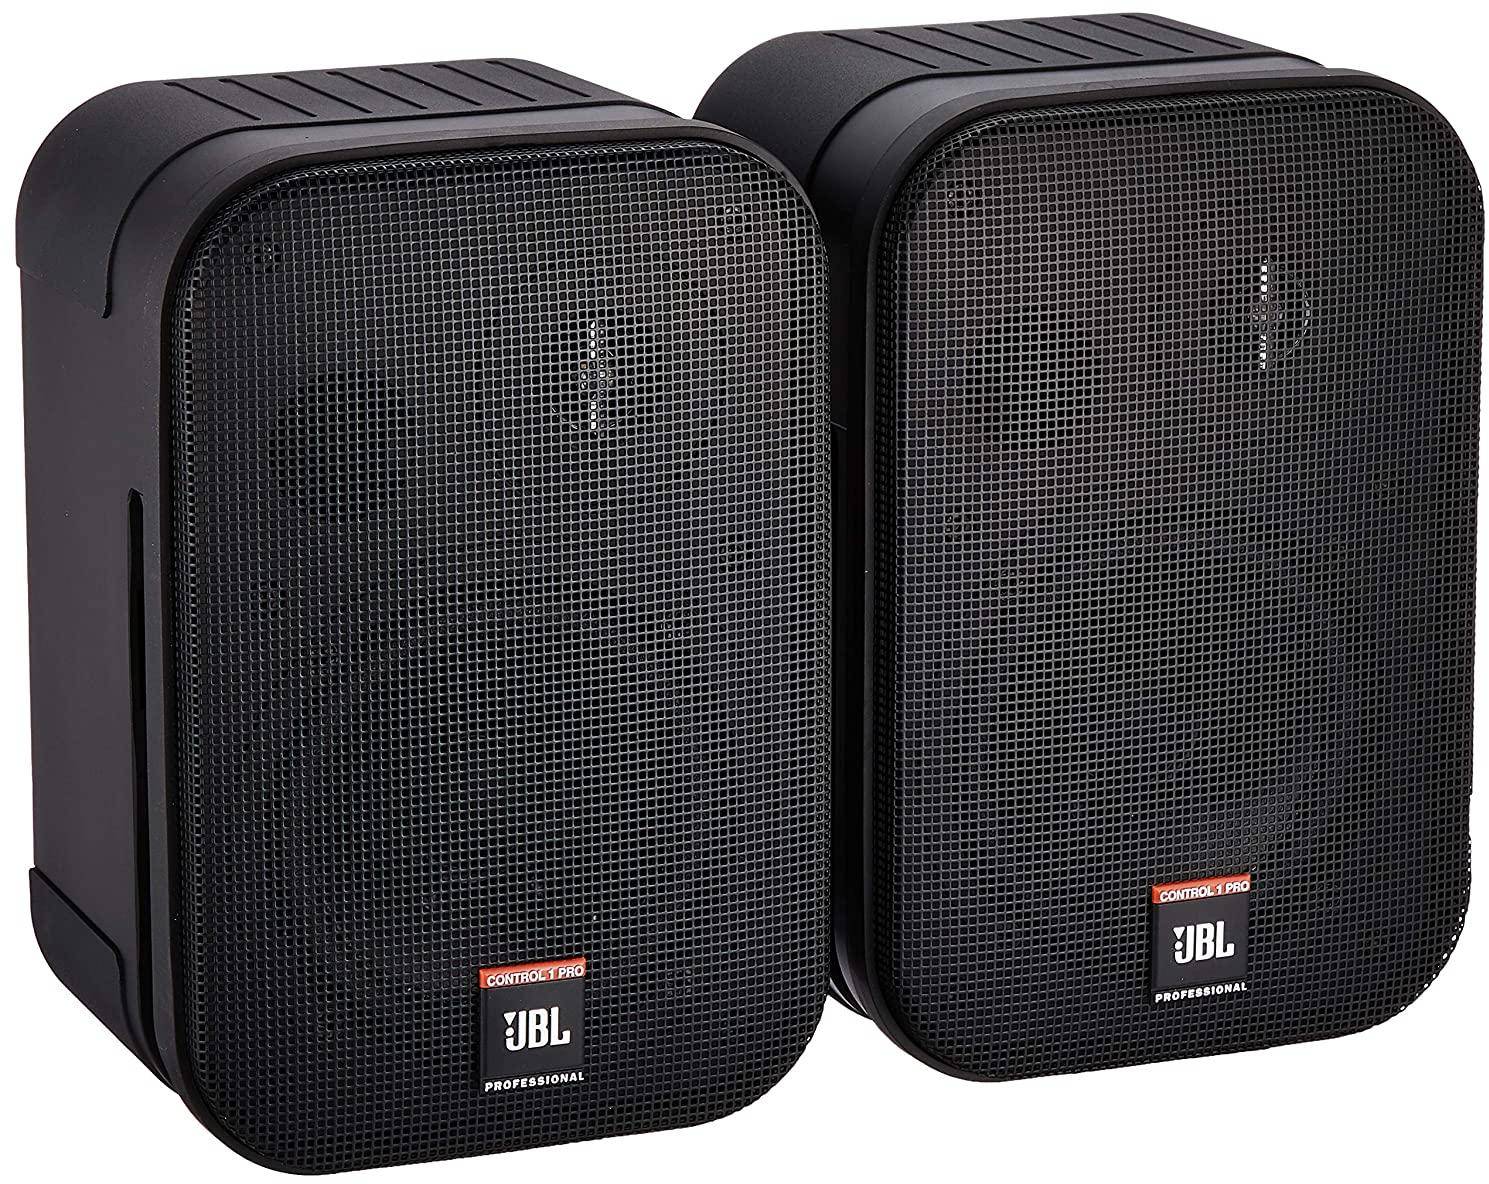 Jbl Control 1 Pro 2-Way Professional Compact speaker zoom image